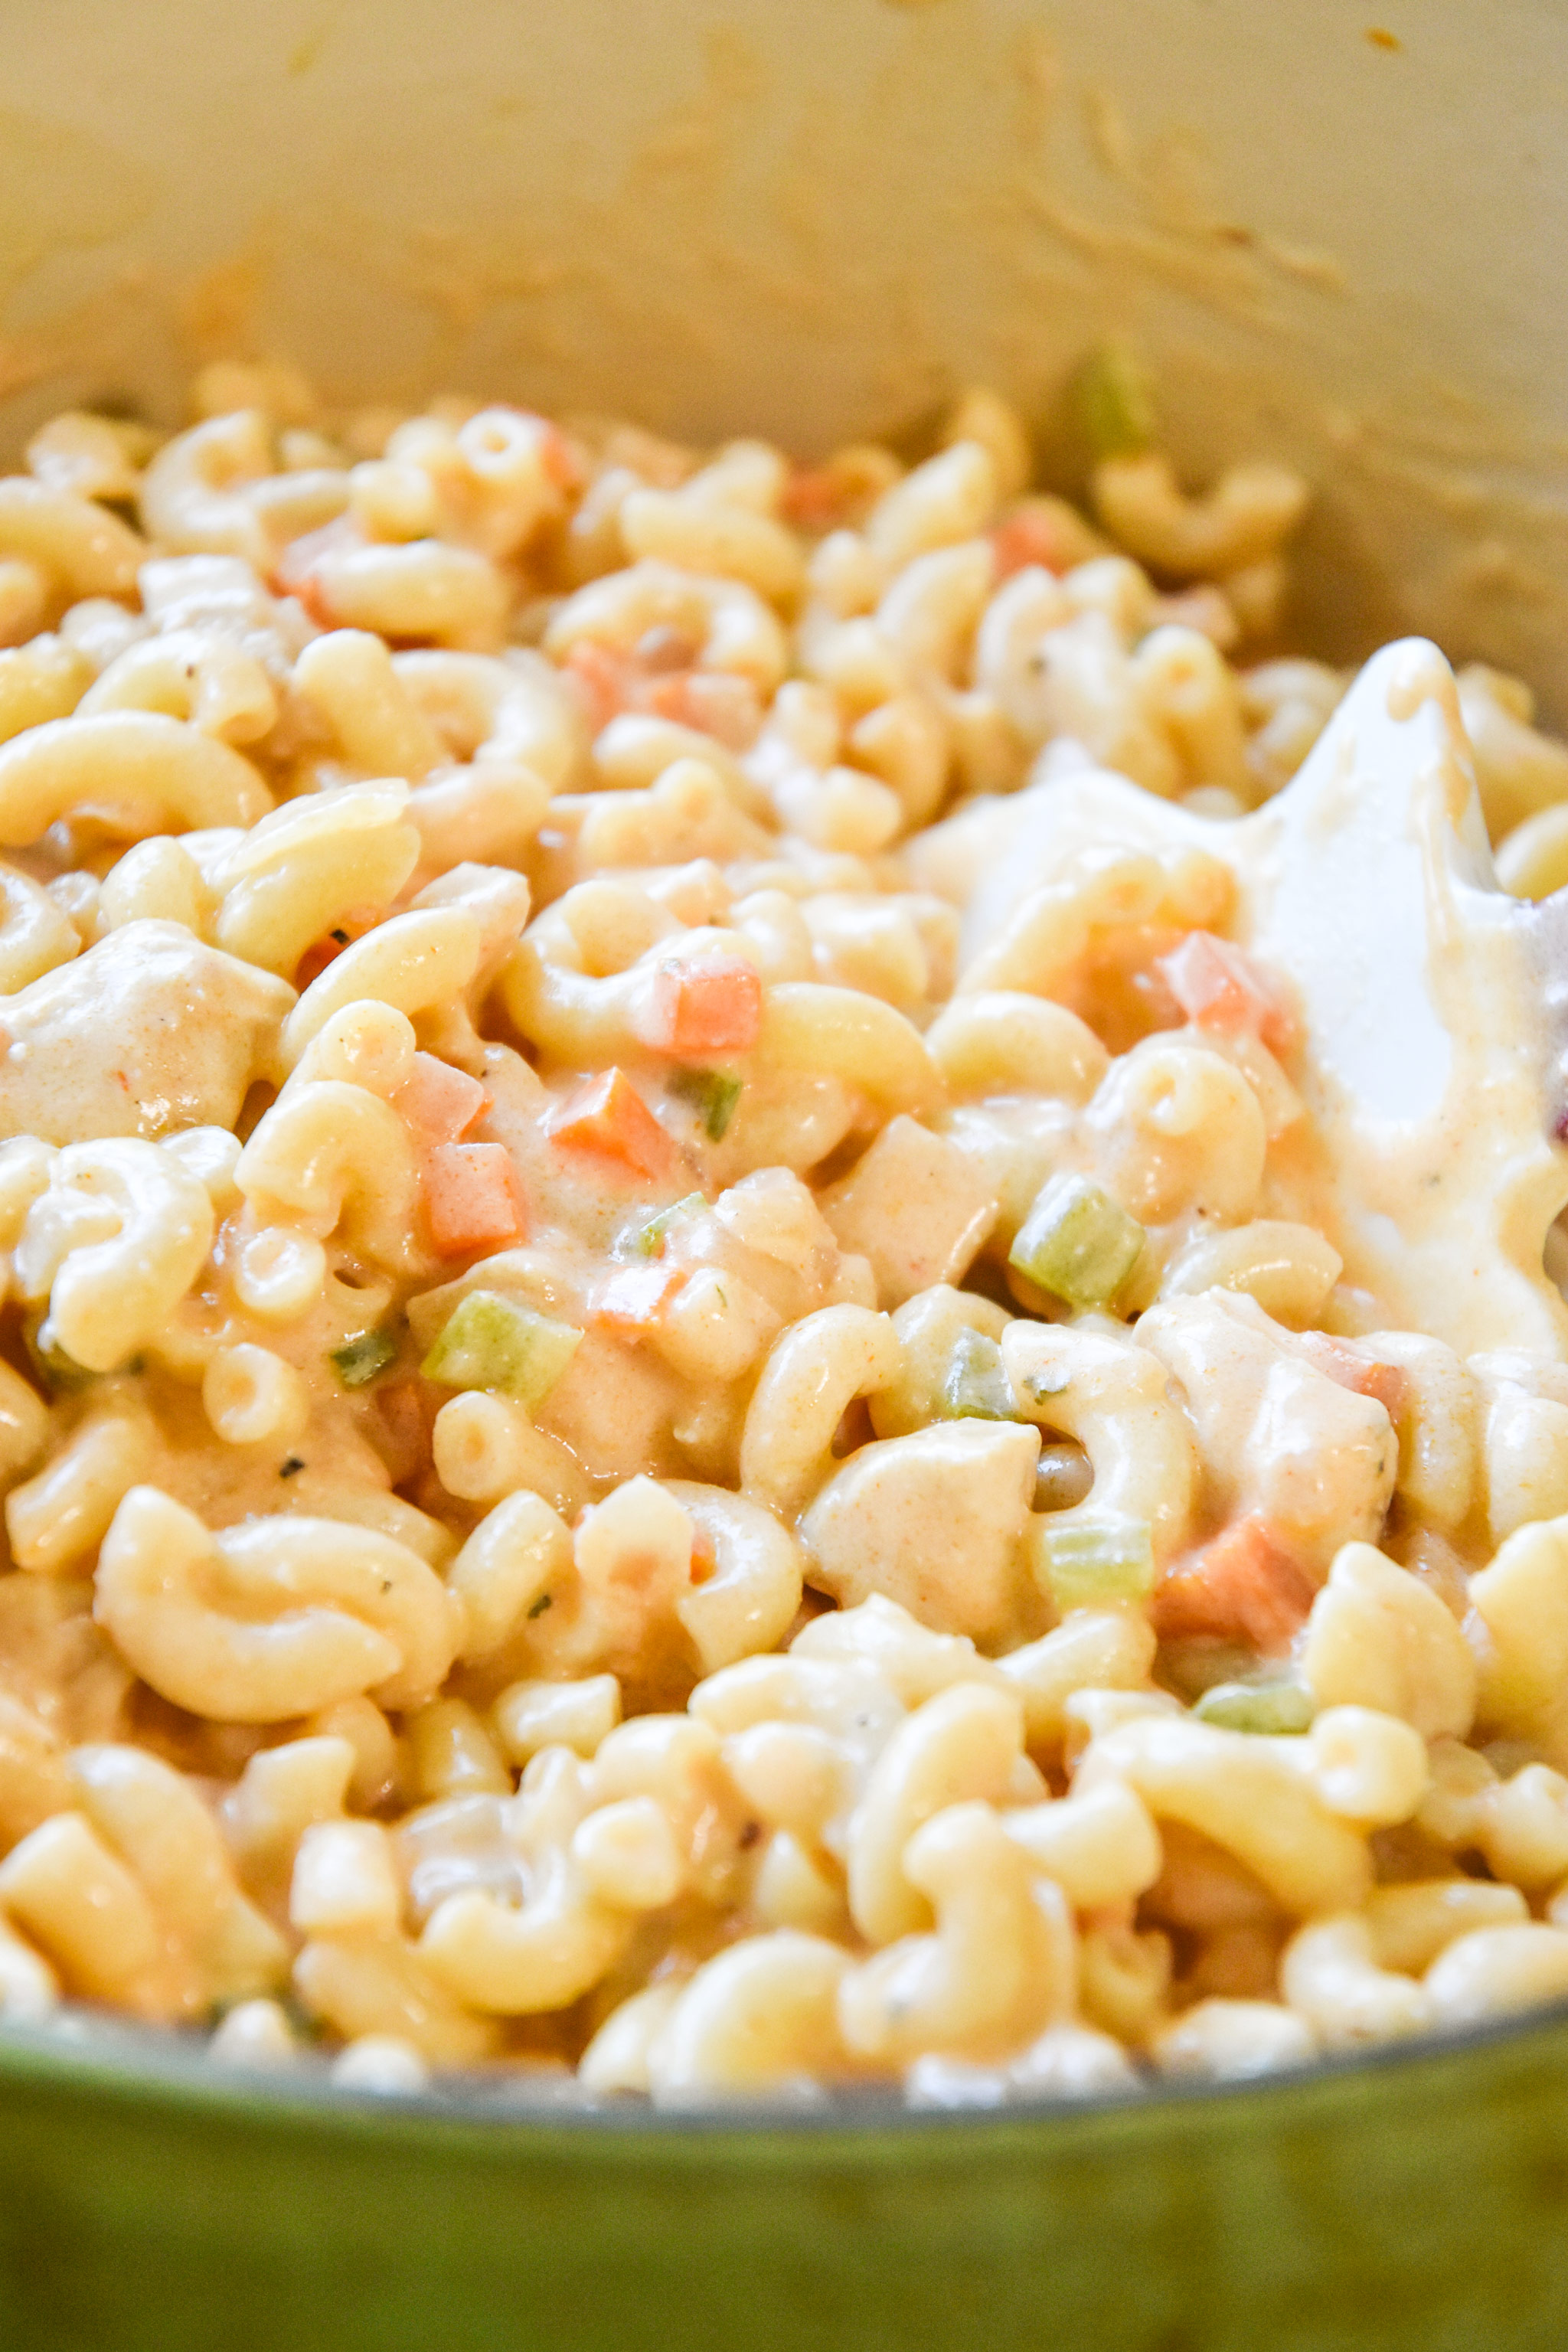 macaroni, veggies and sauce all mixed together to make buffalo chicken mac and cheese